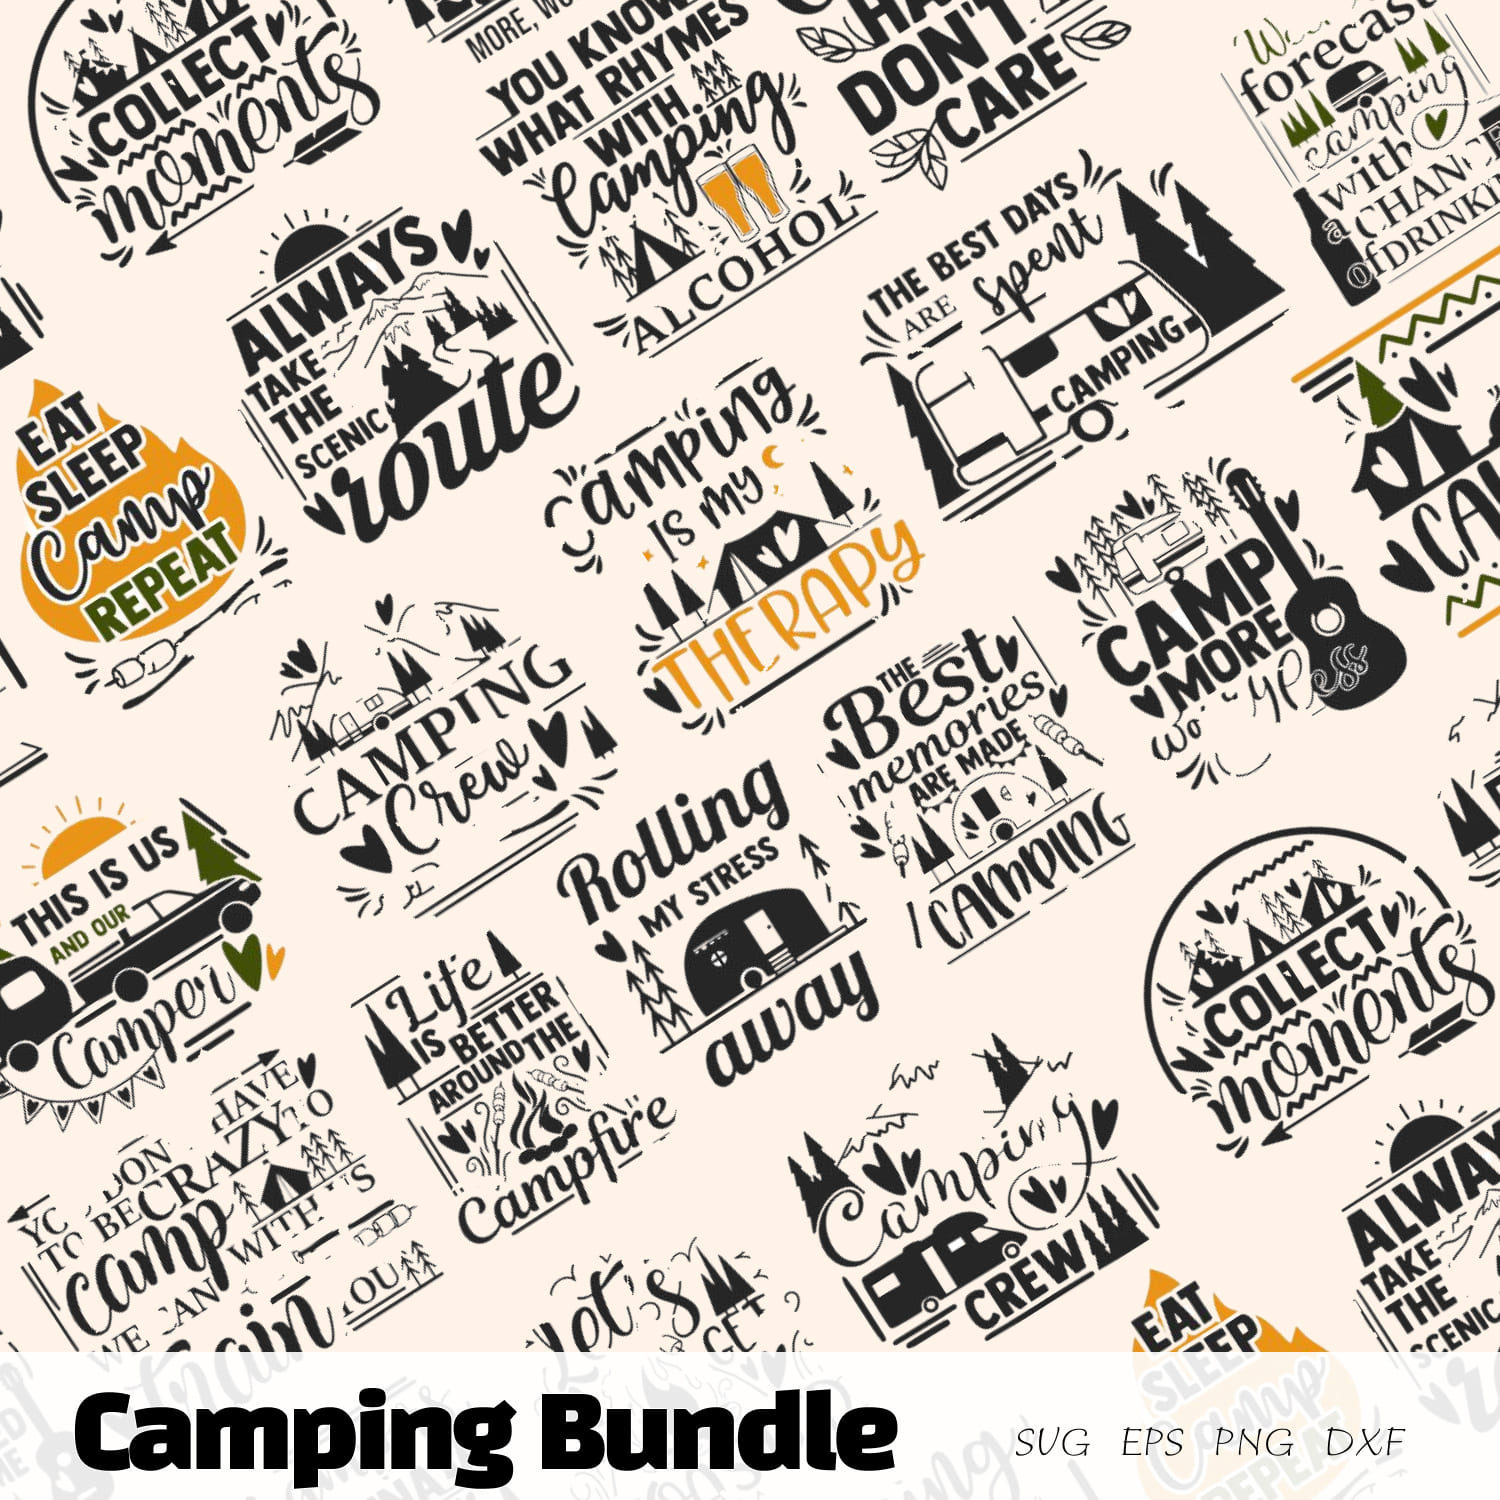 Build your own camping rules with this wonderful bundle.